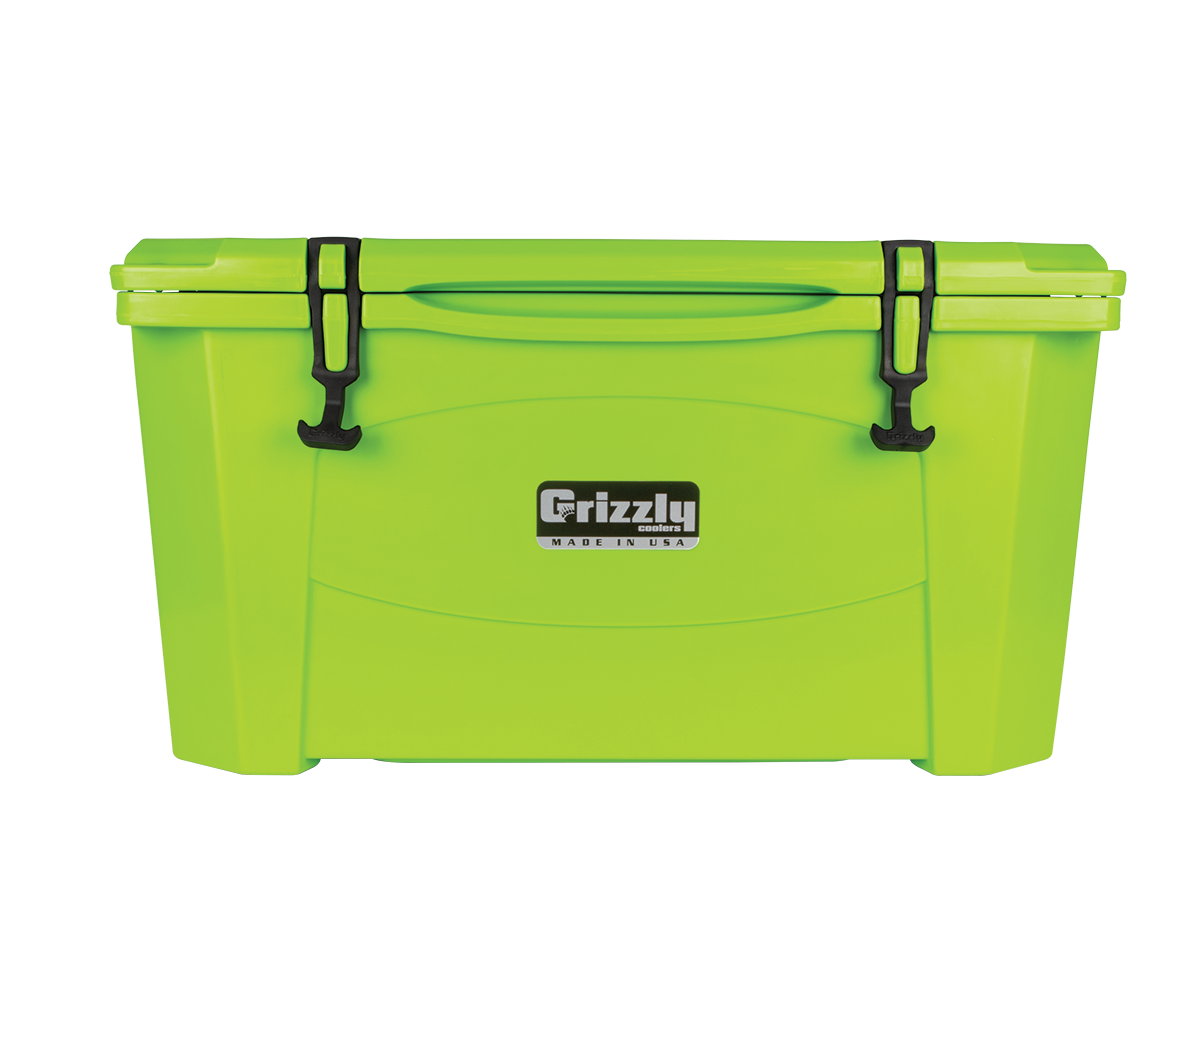 grizzly 60 cooler